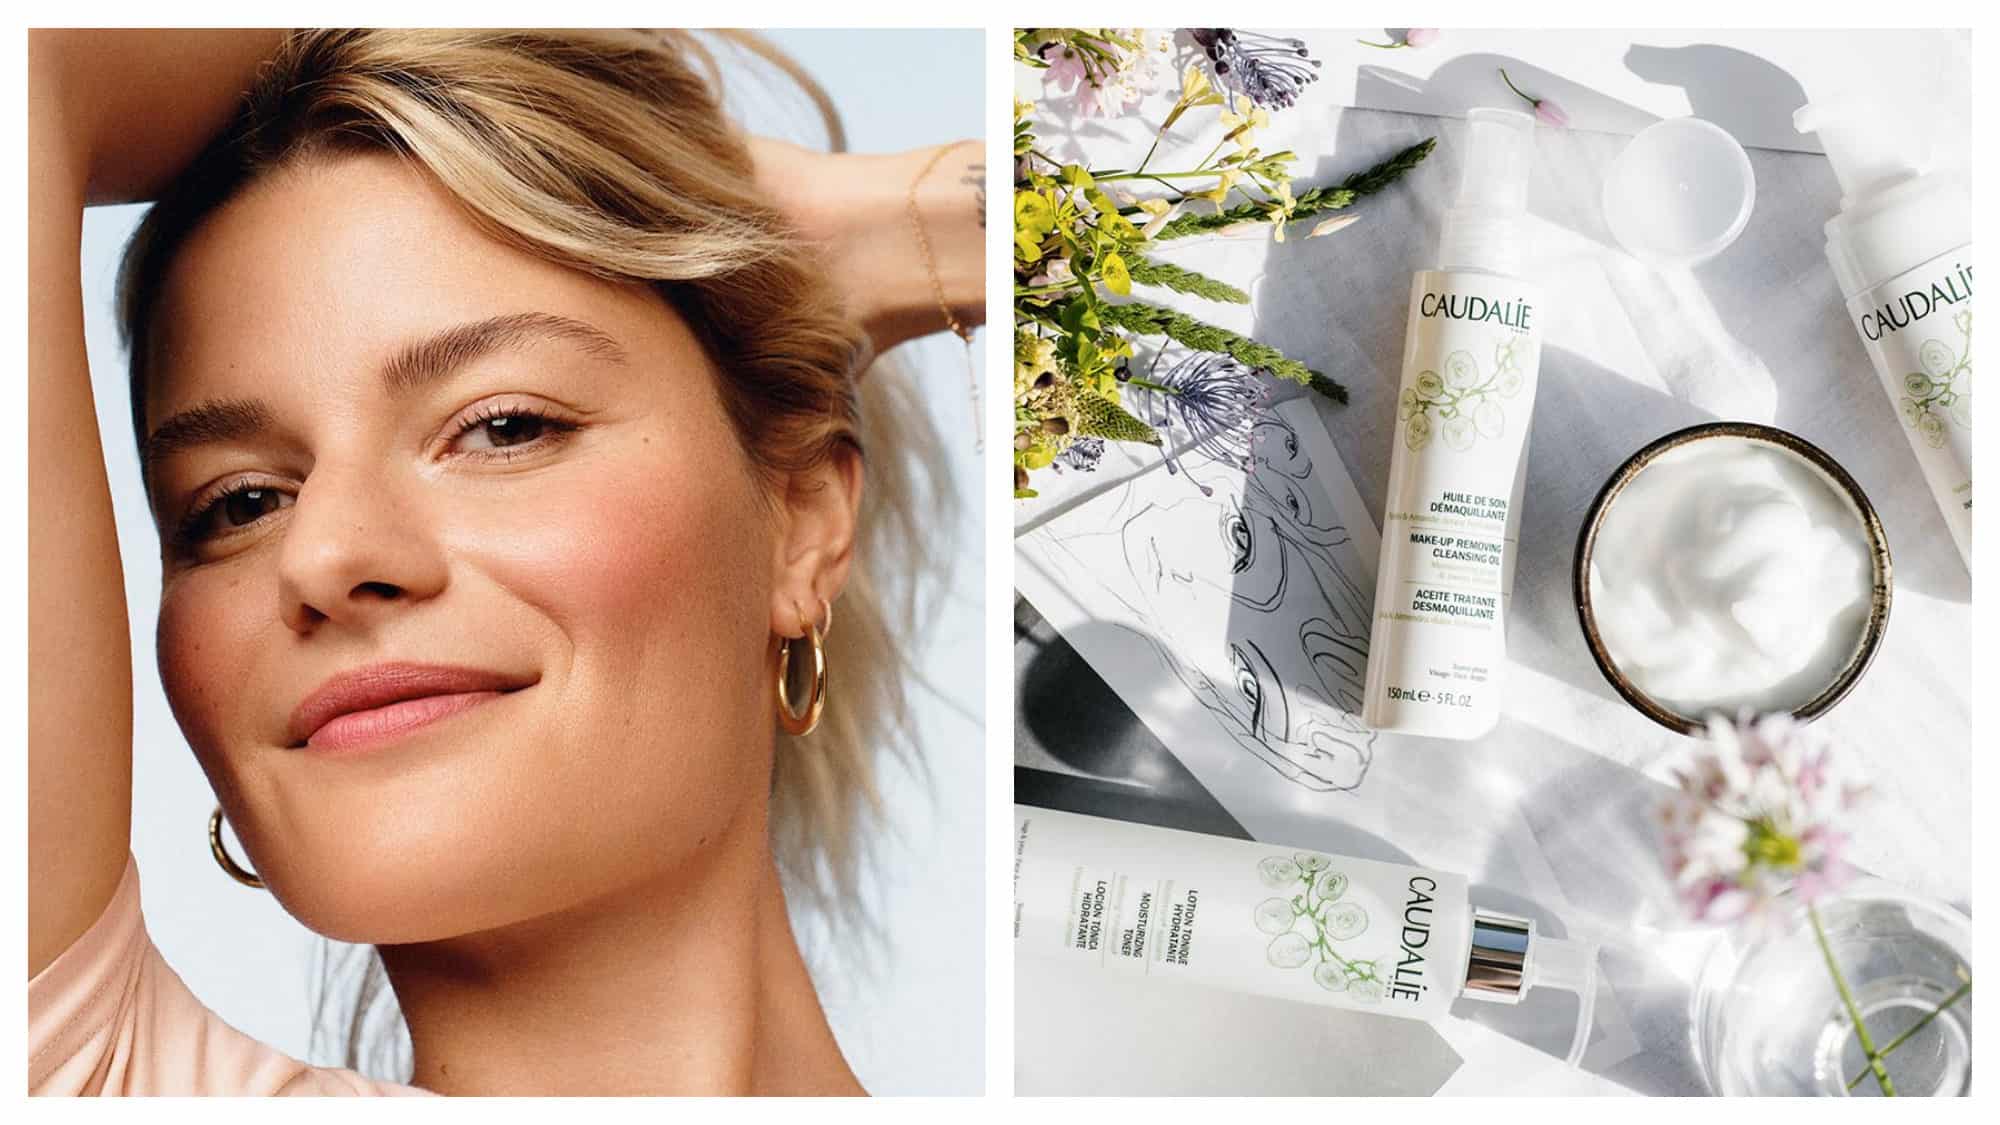 Girl with blonde hair, gold earrings and glowing skin. Caudalie products surrounded by flowers